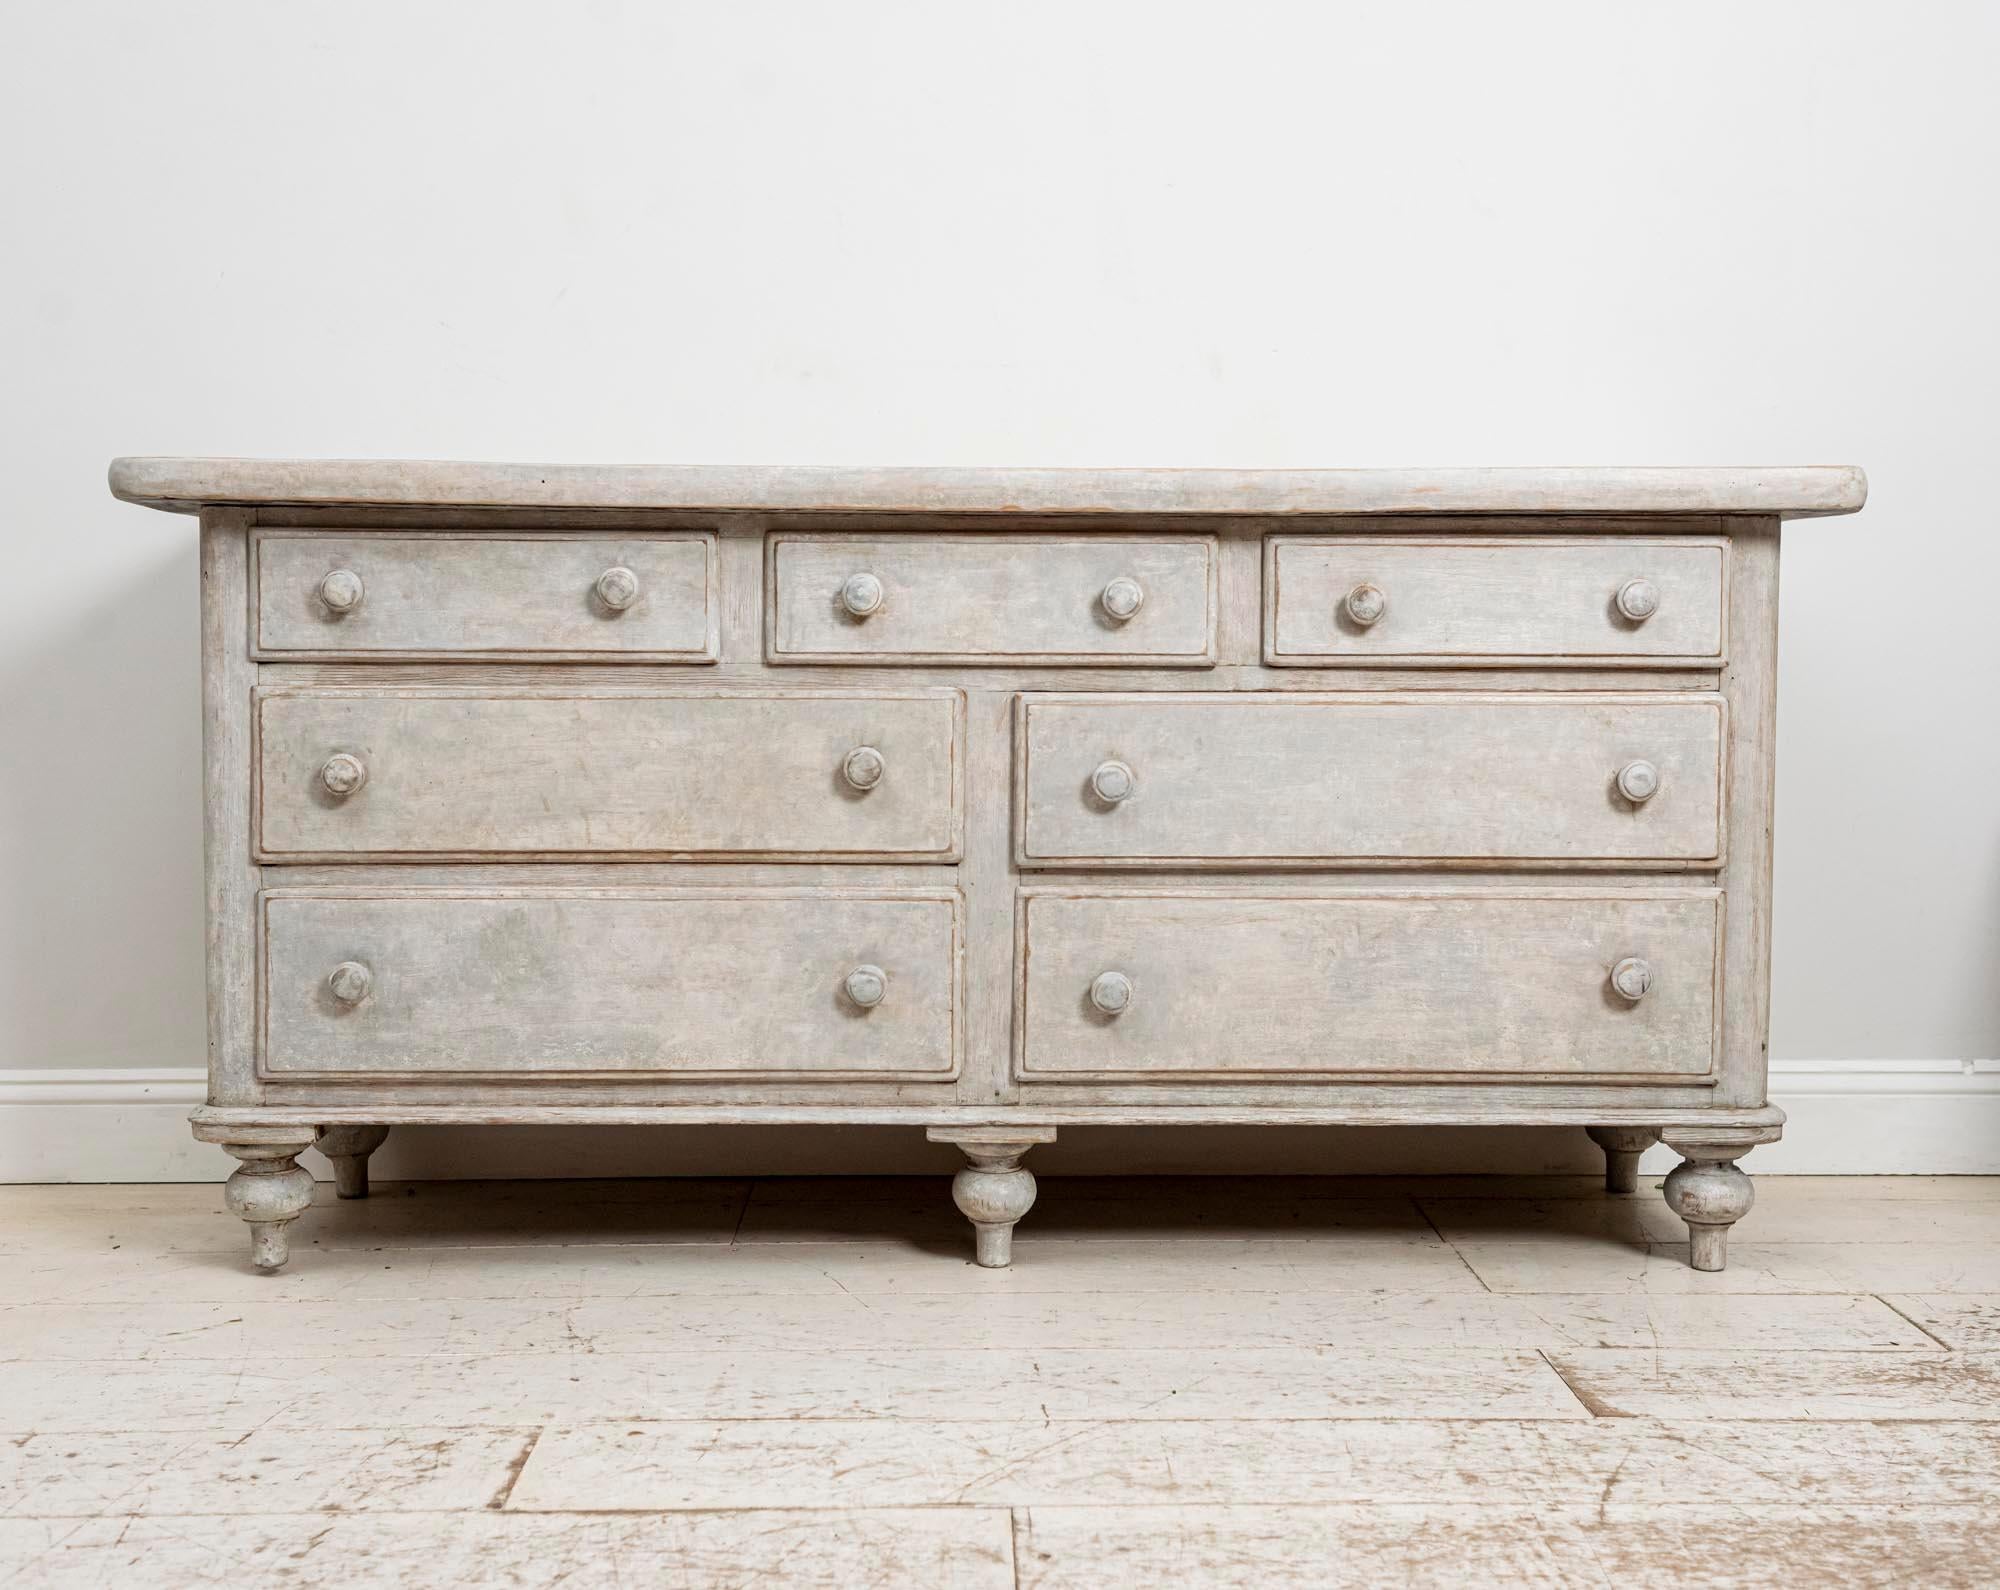 Late 19th century painted pine bank of drawers. Featuring three short drawers which sit over two sets of two longer drawers. A very useful and functional piece of furniture which would be perfect for a kitchen or living room. The chest of drawers